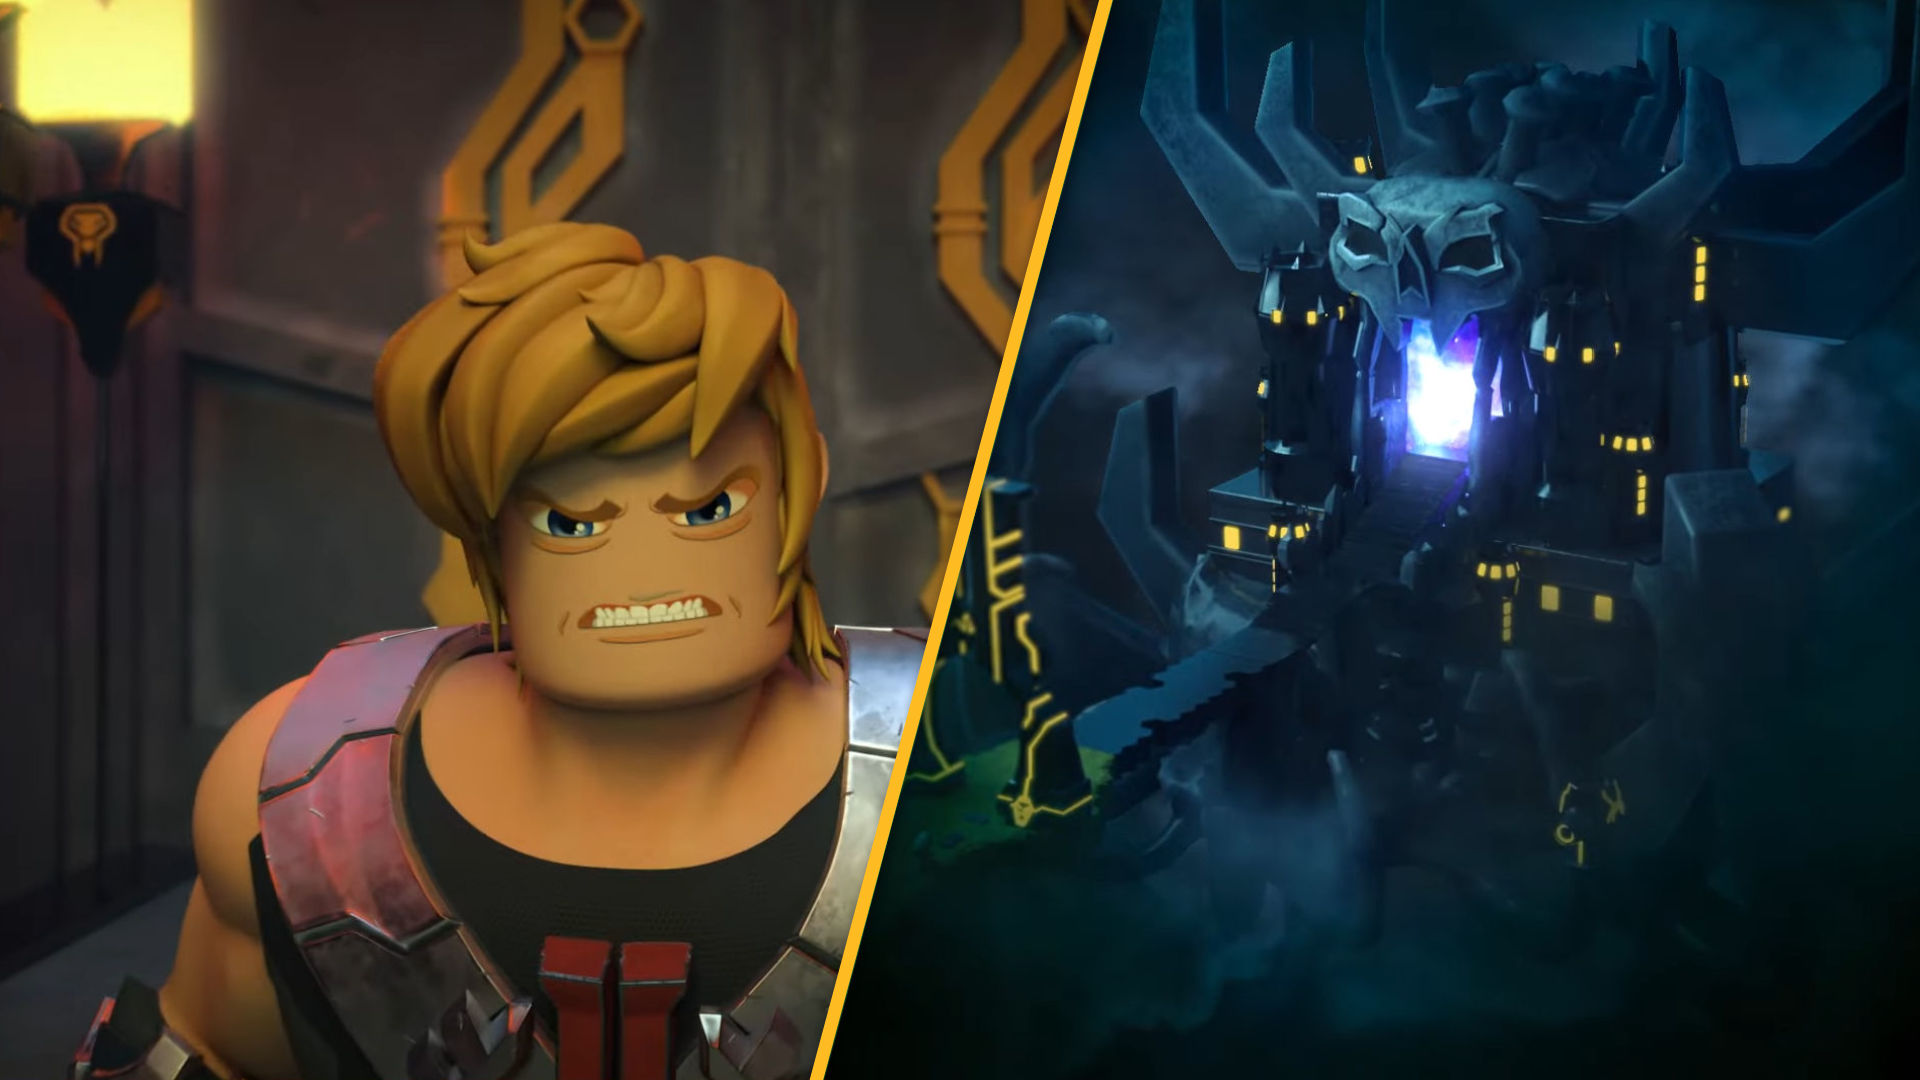 Kidscreen » Archive » Mattel launches new He-Man game in Roblox